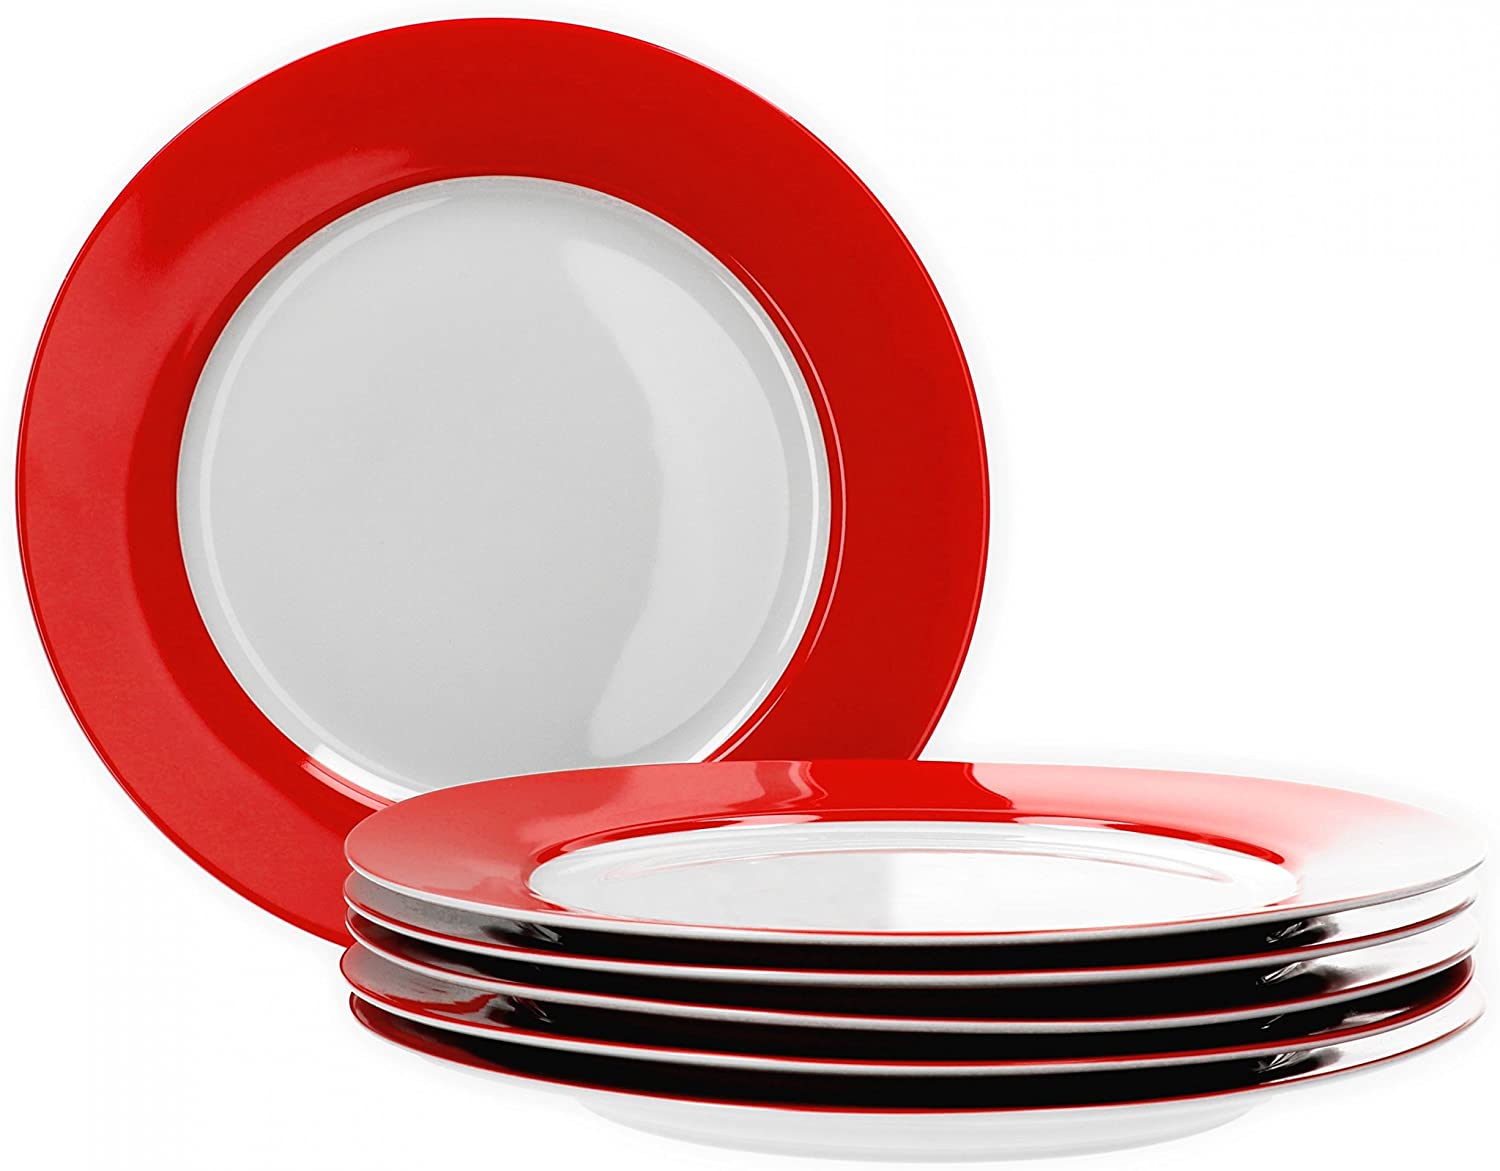 Van Well Vario Dinner Plate Set 6 Pieces I Dinner Service for 6 People I Flat Dining Plate with Diameter 26.5 cm I Porcelain Service White with Red Rim I Plate Set Microwave Safe